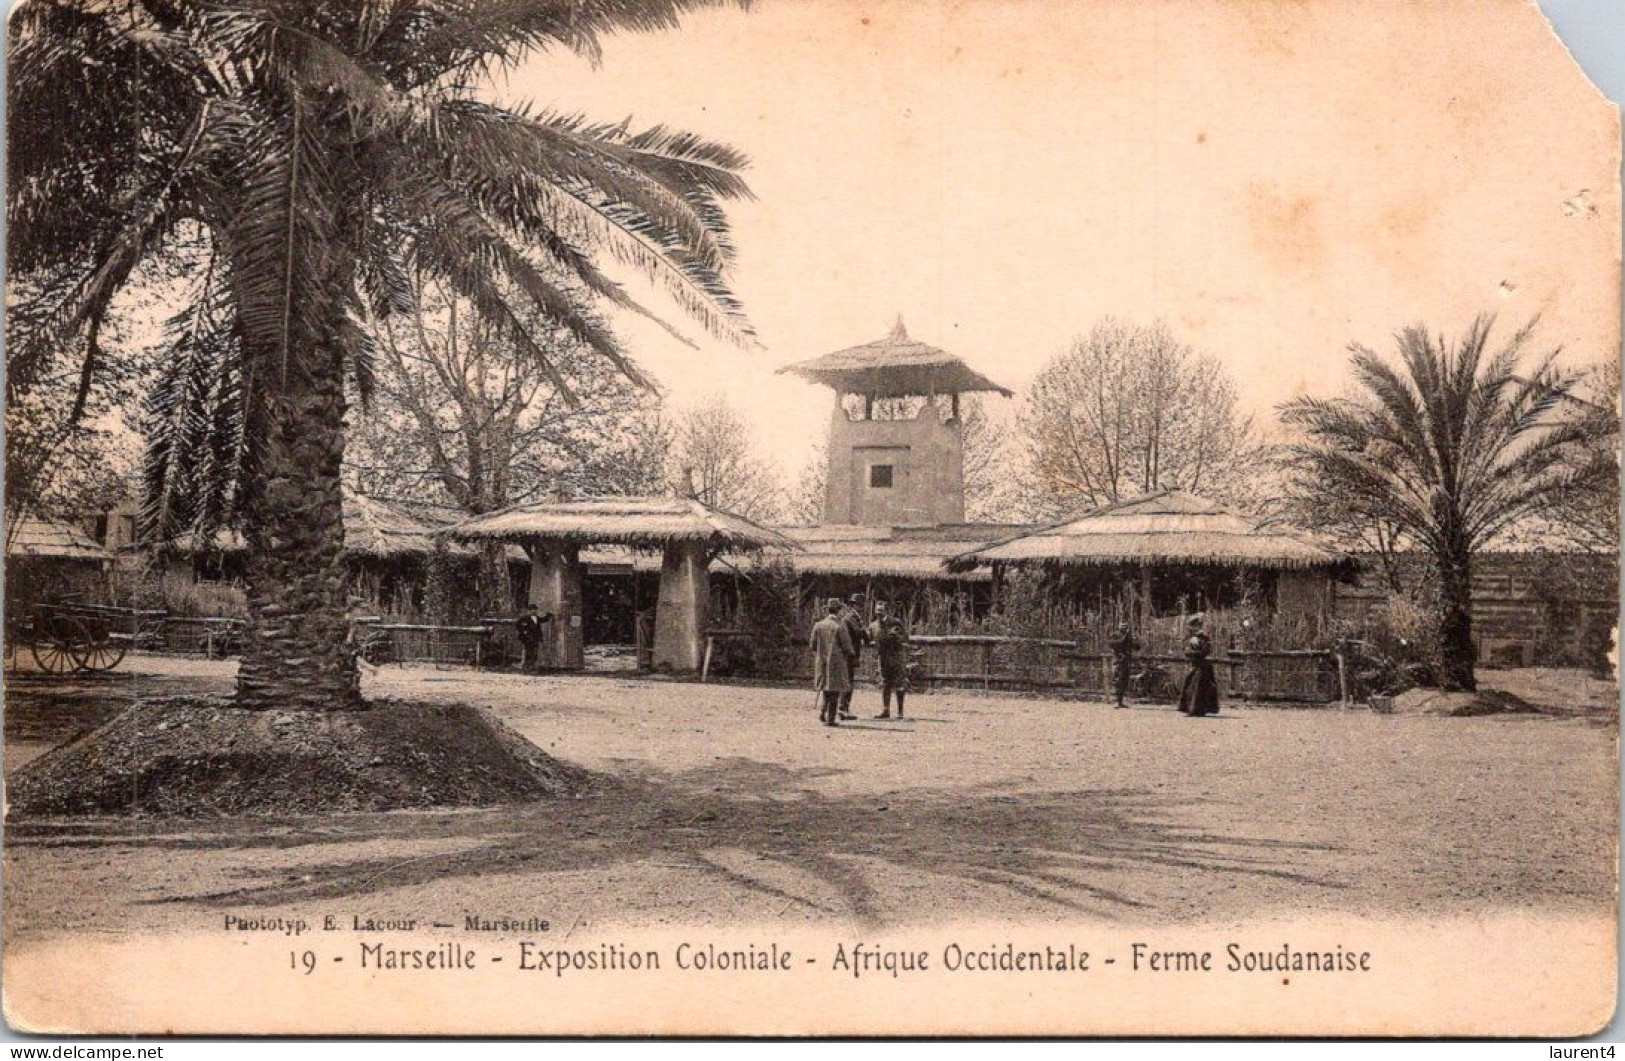 1-4-2024 (4 Y 36A) VERY OLD - B/w - France - Marseille , Exposition Coloniale - Afrique Occidentale Ferme Soudanaise - Expositions